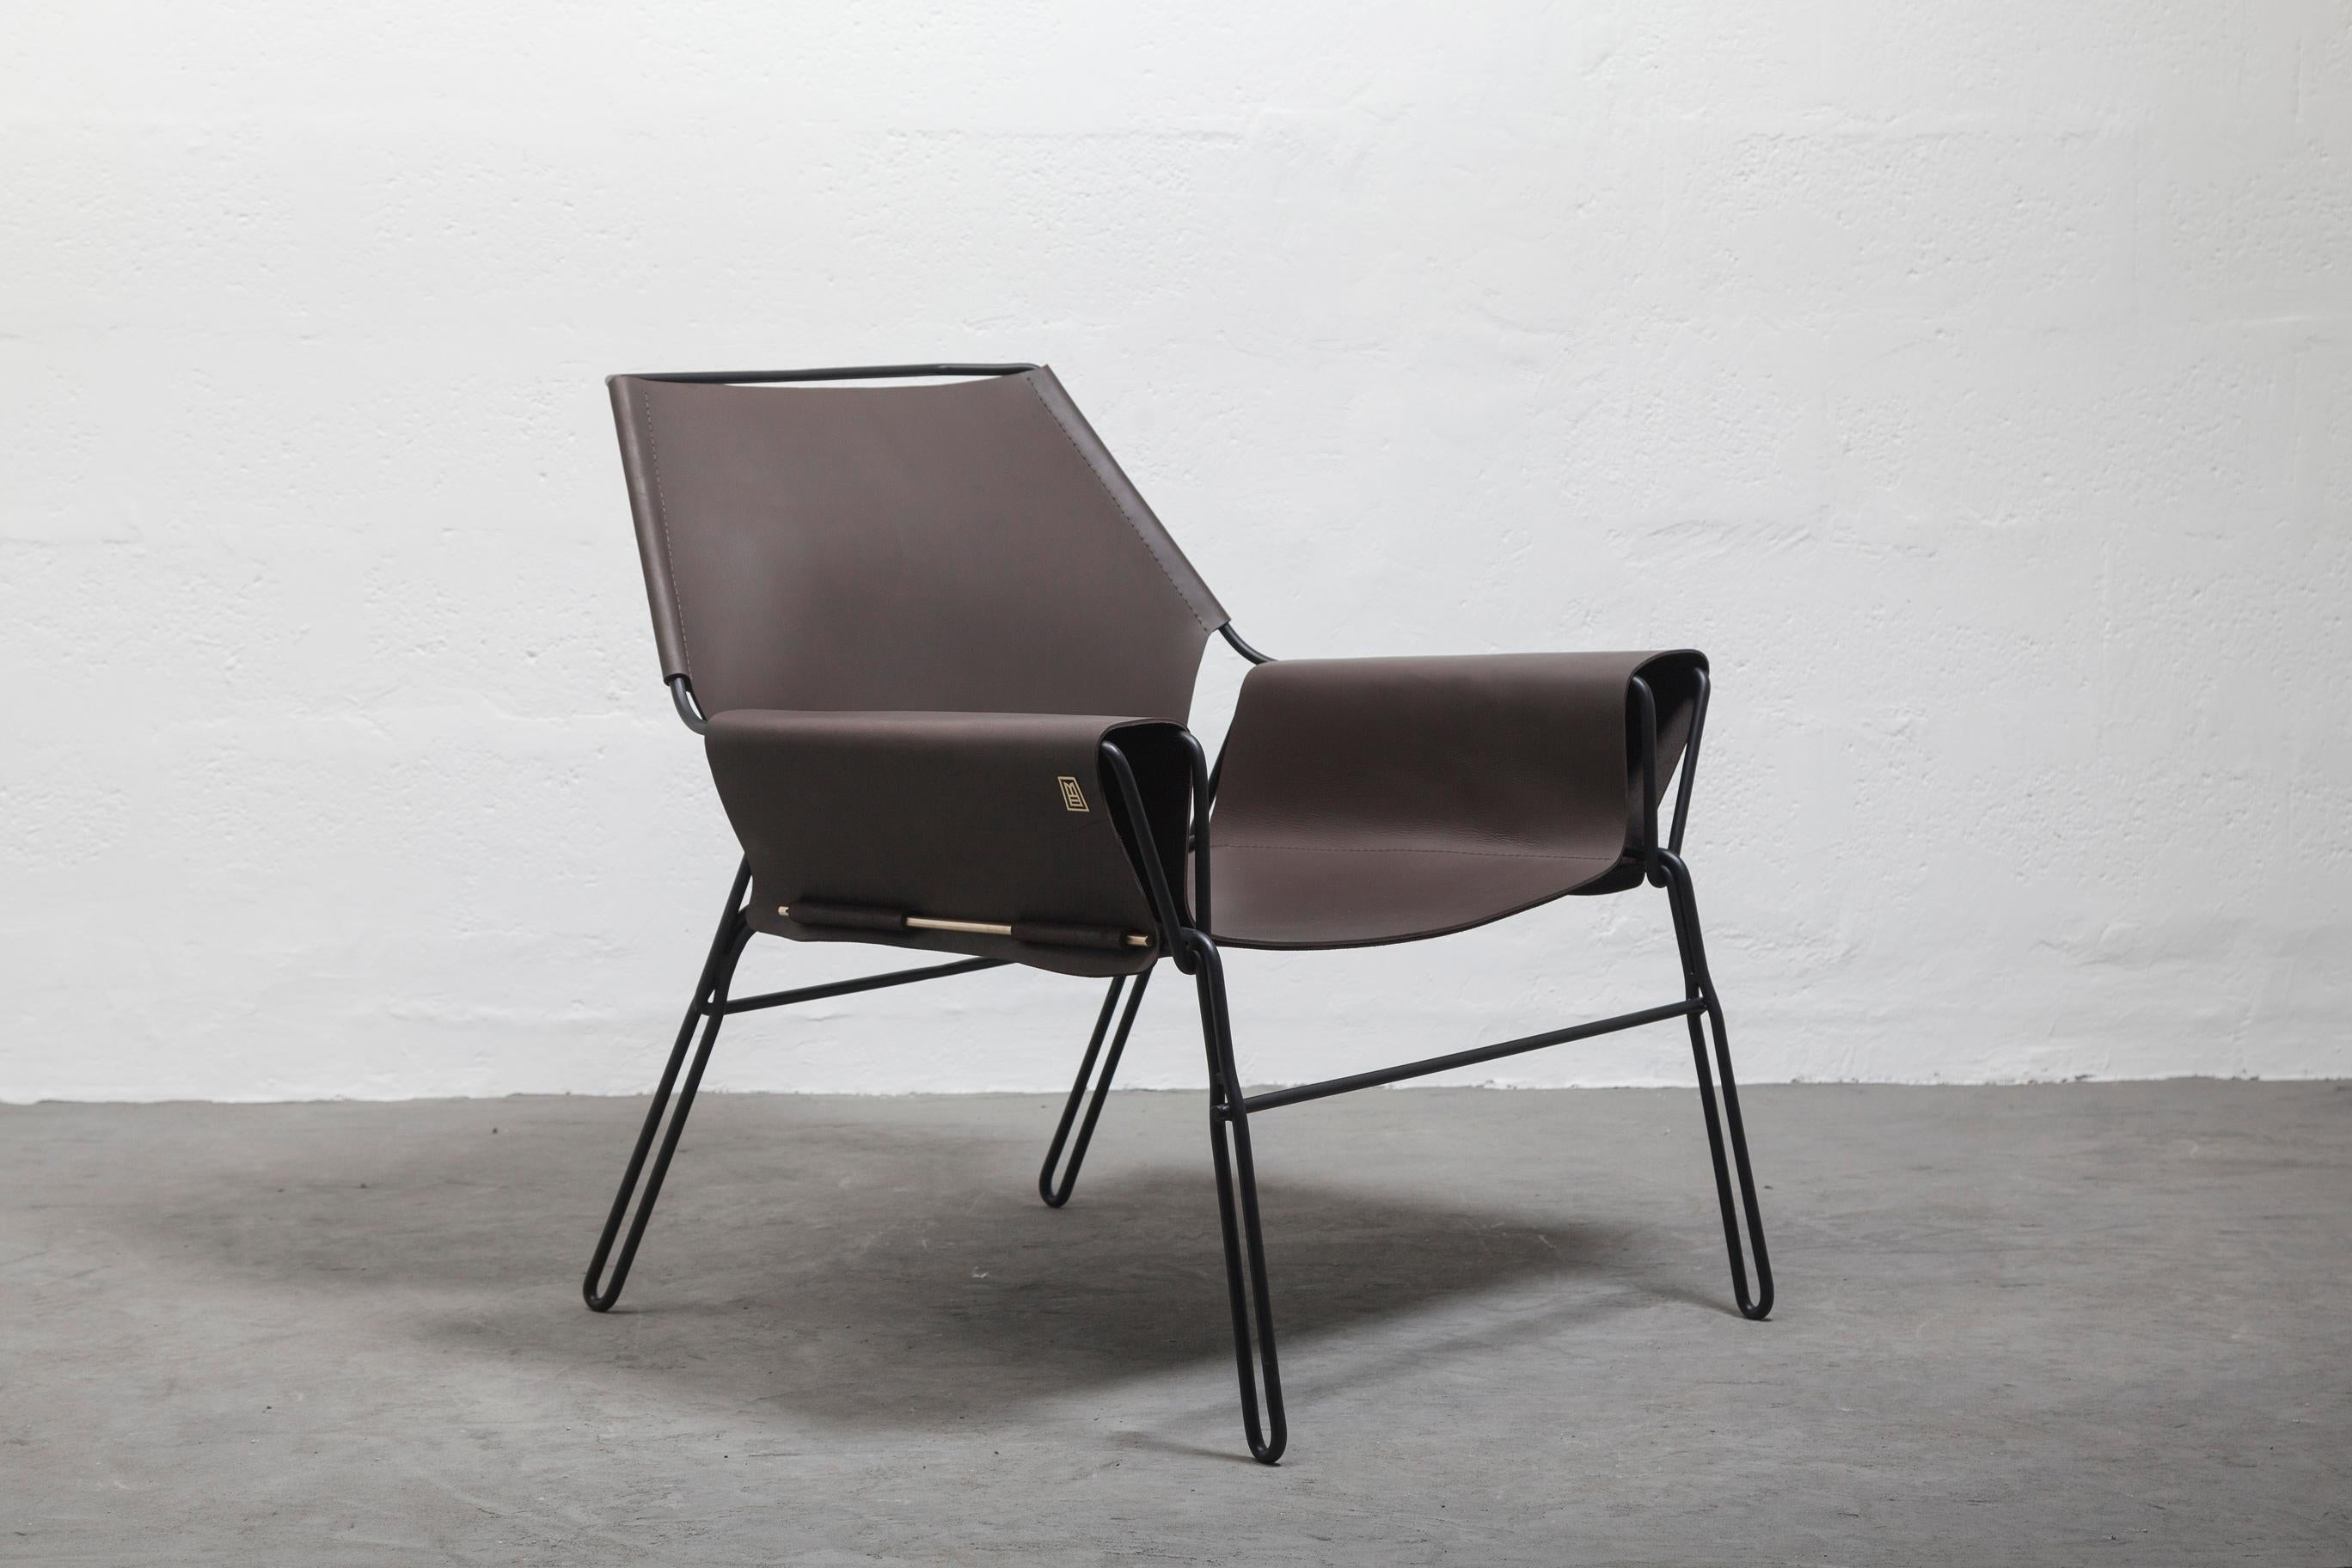 Perfidia_02 Lounge Chair Brown by ALEJANDRO MOYANO

L 30.5